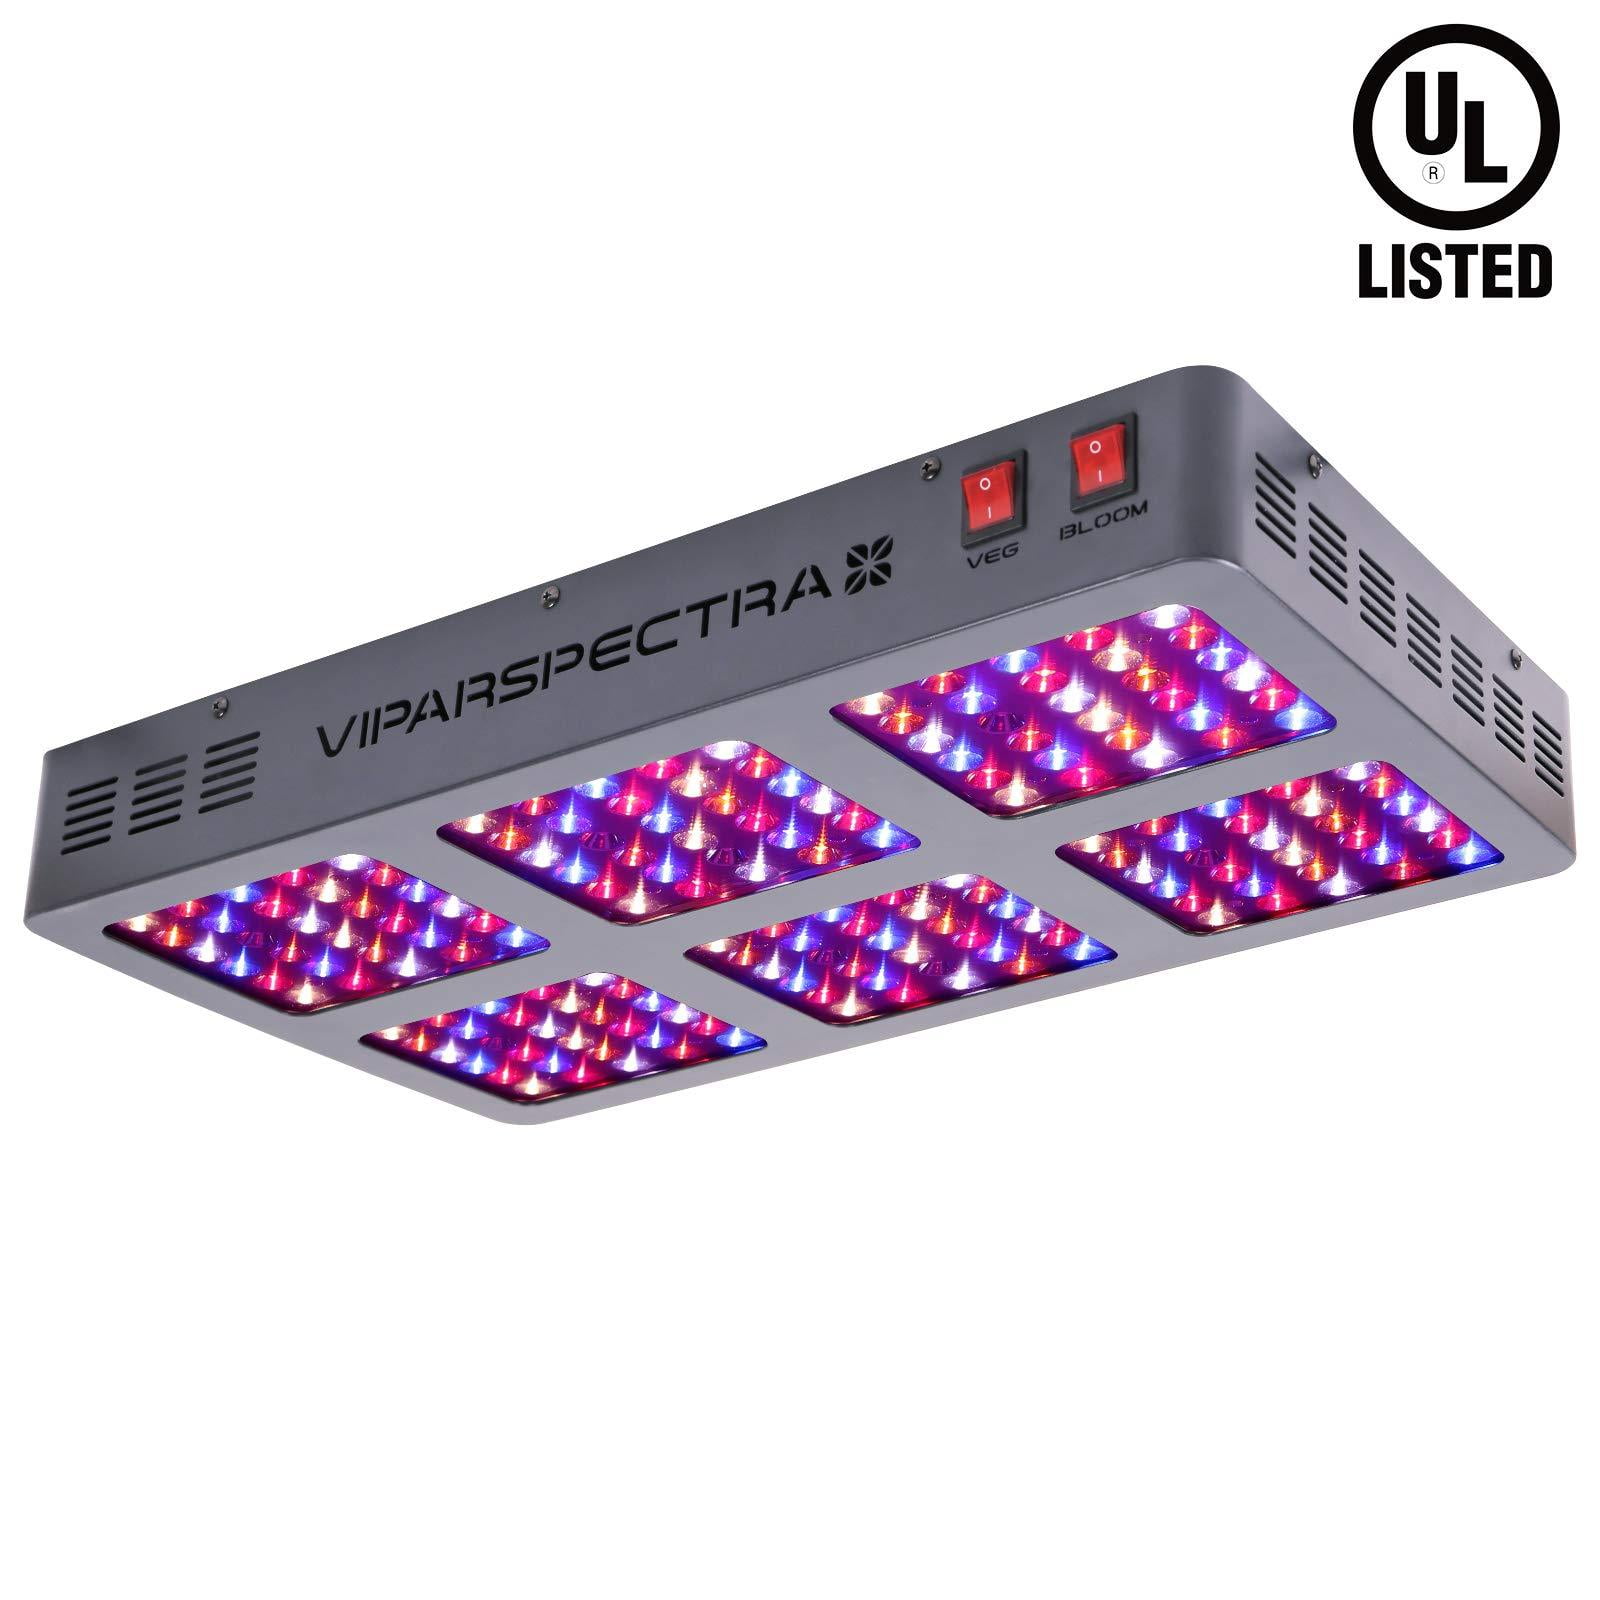 VIPARSPECTRA 900W LED Grow Light Full Spectrum Double Switch Plant Light for Indoor Plants Veg and Flower